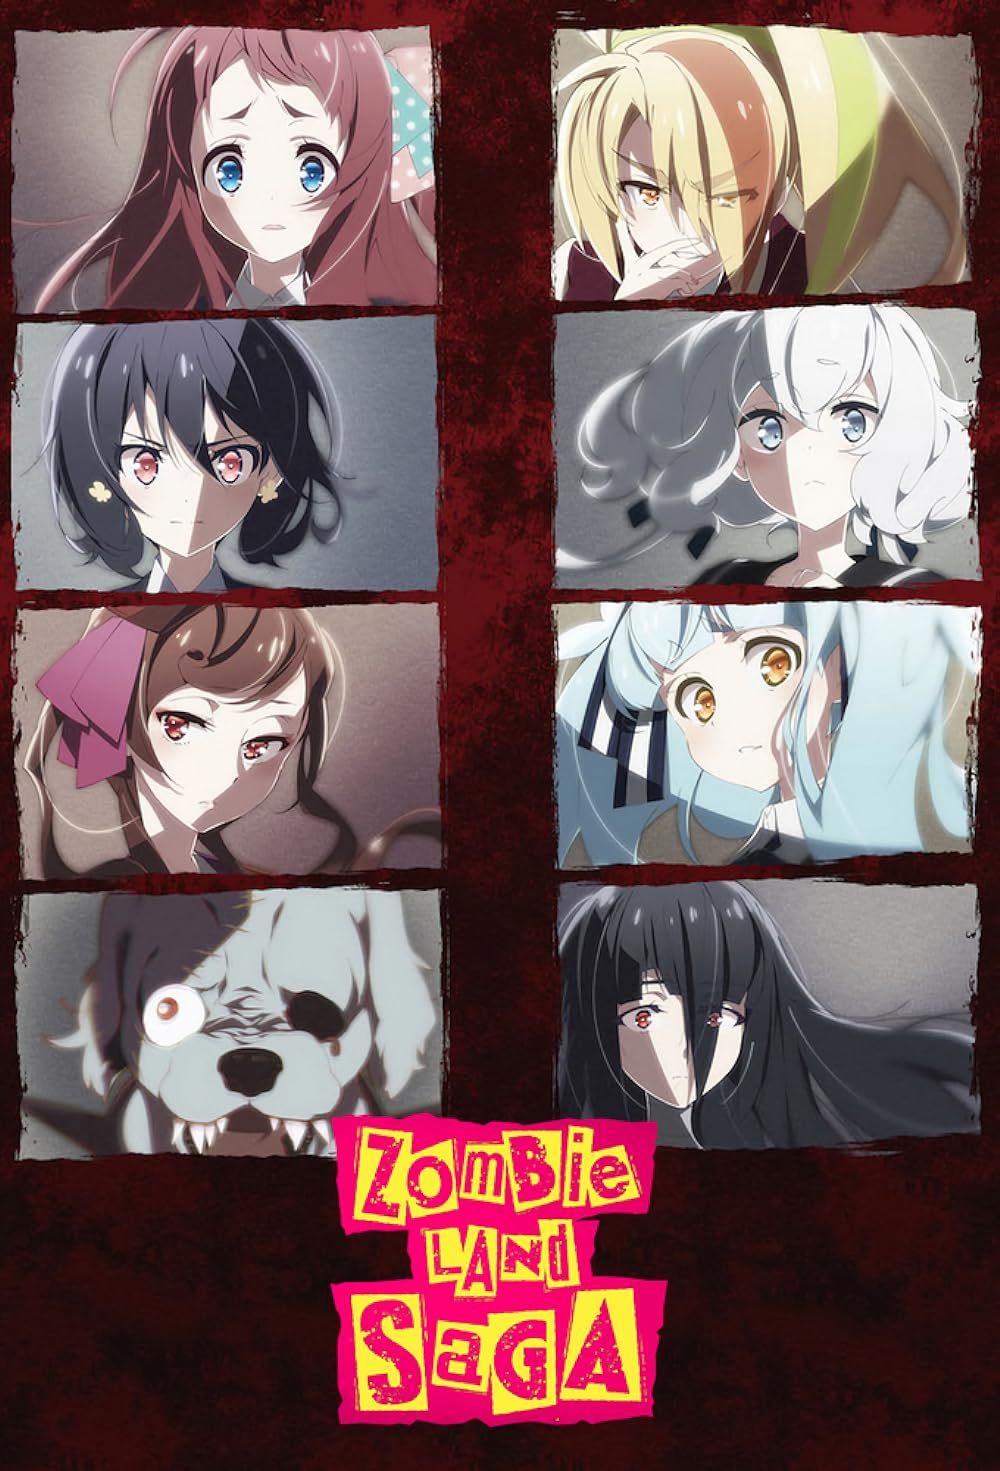 Images of the cast of Zombie Land Saga are arranged in rows on the poster